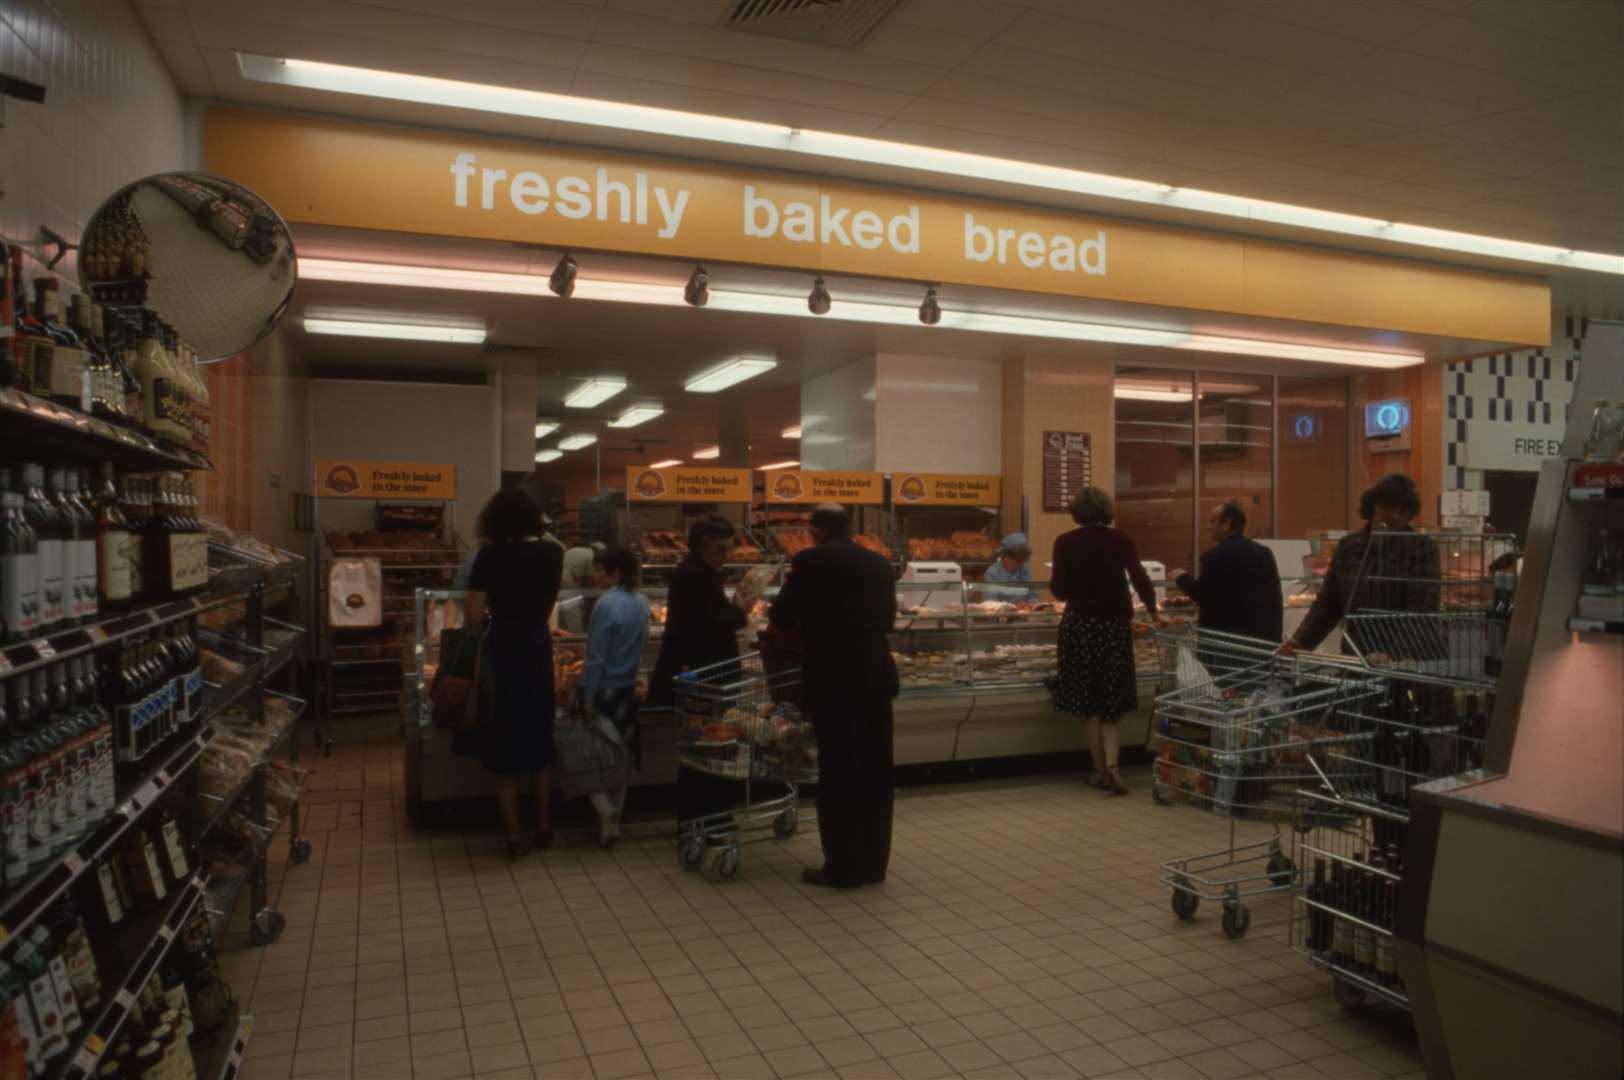 Inside the Dover High Street store in 1980. Picture: The Sainsbury Archive, Museum of London Docklands